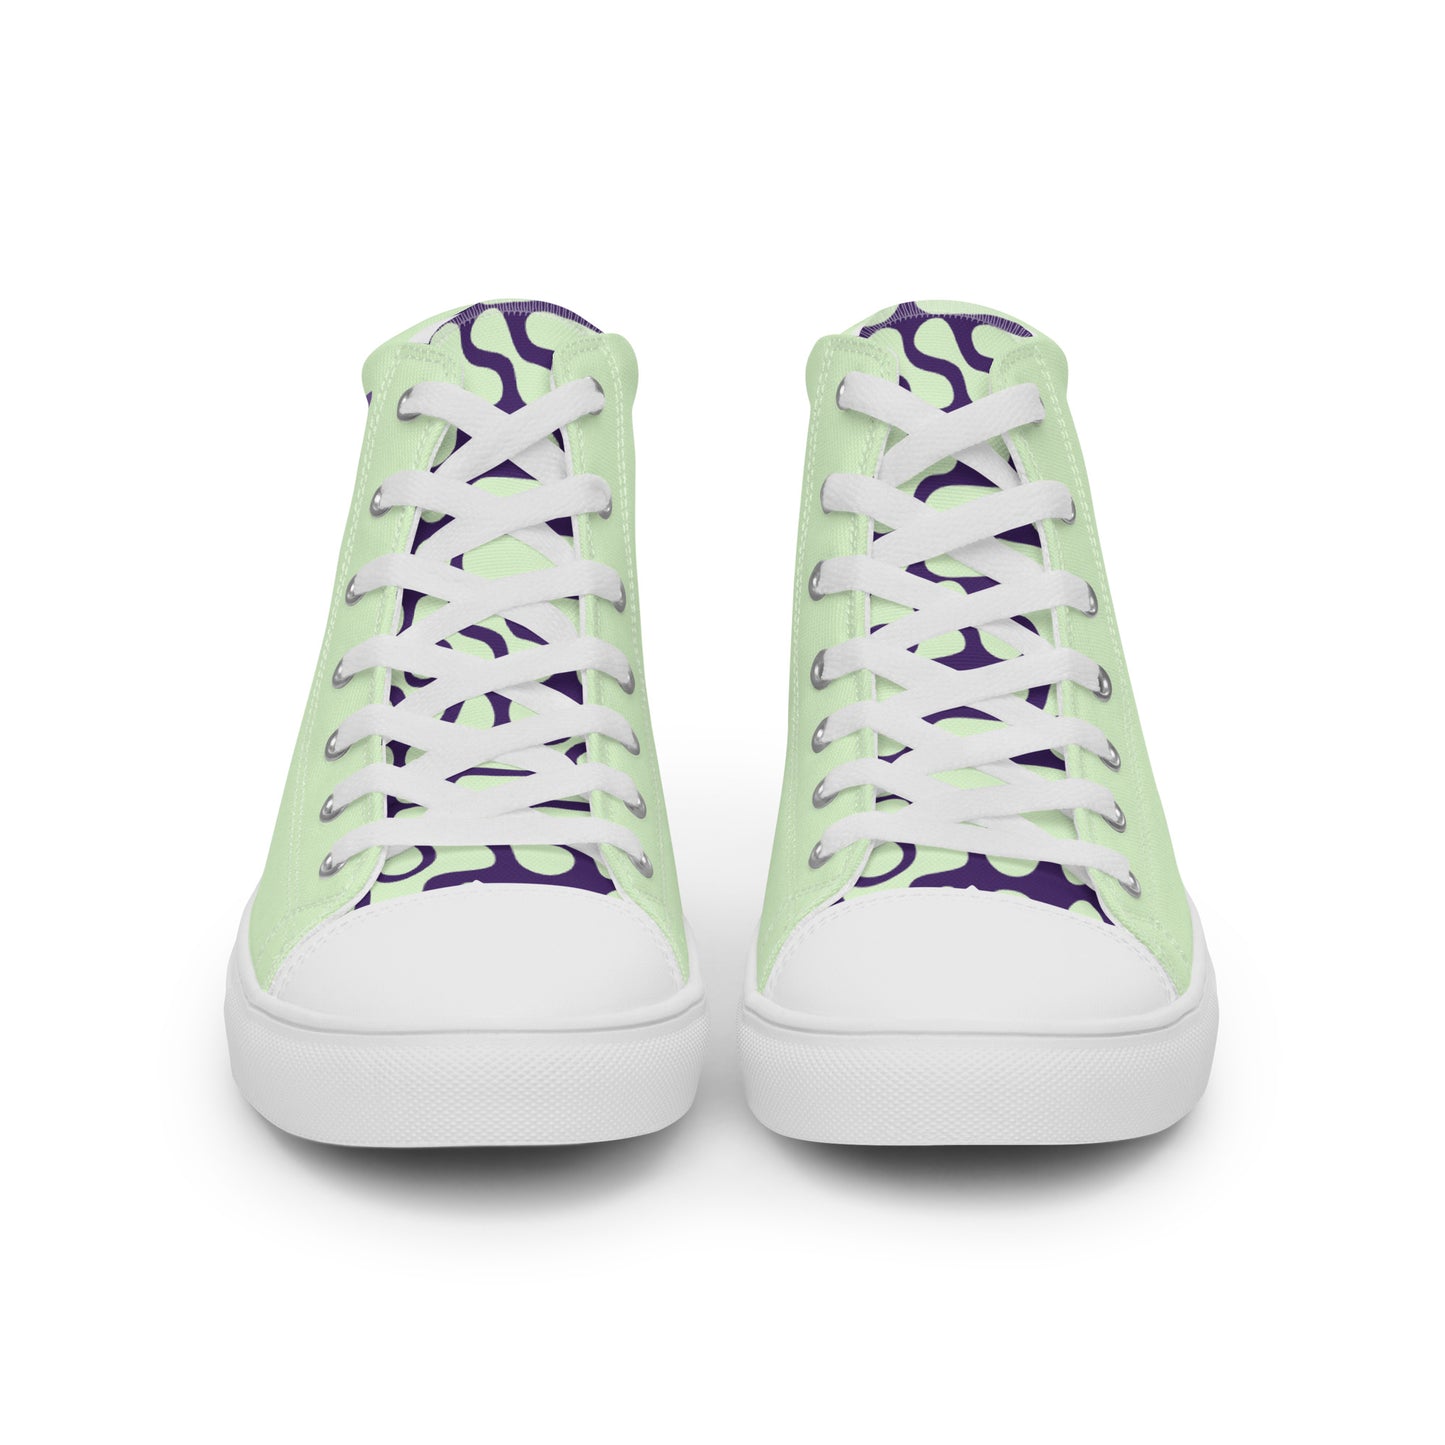 Stewart's Passion Women’s high top canvas shoes